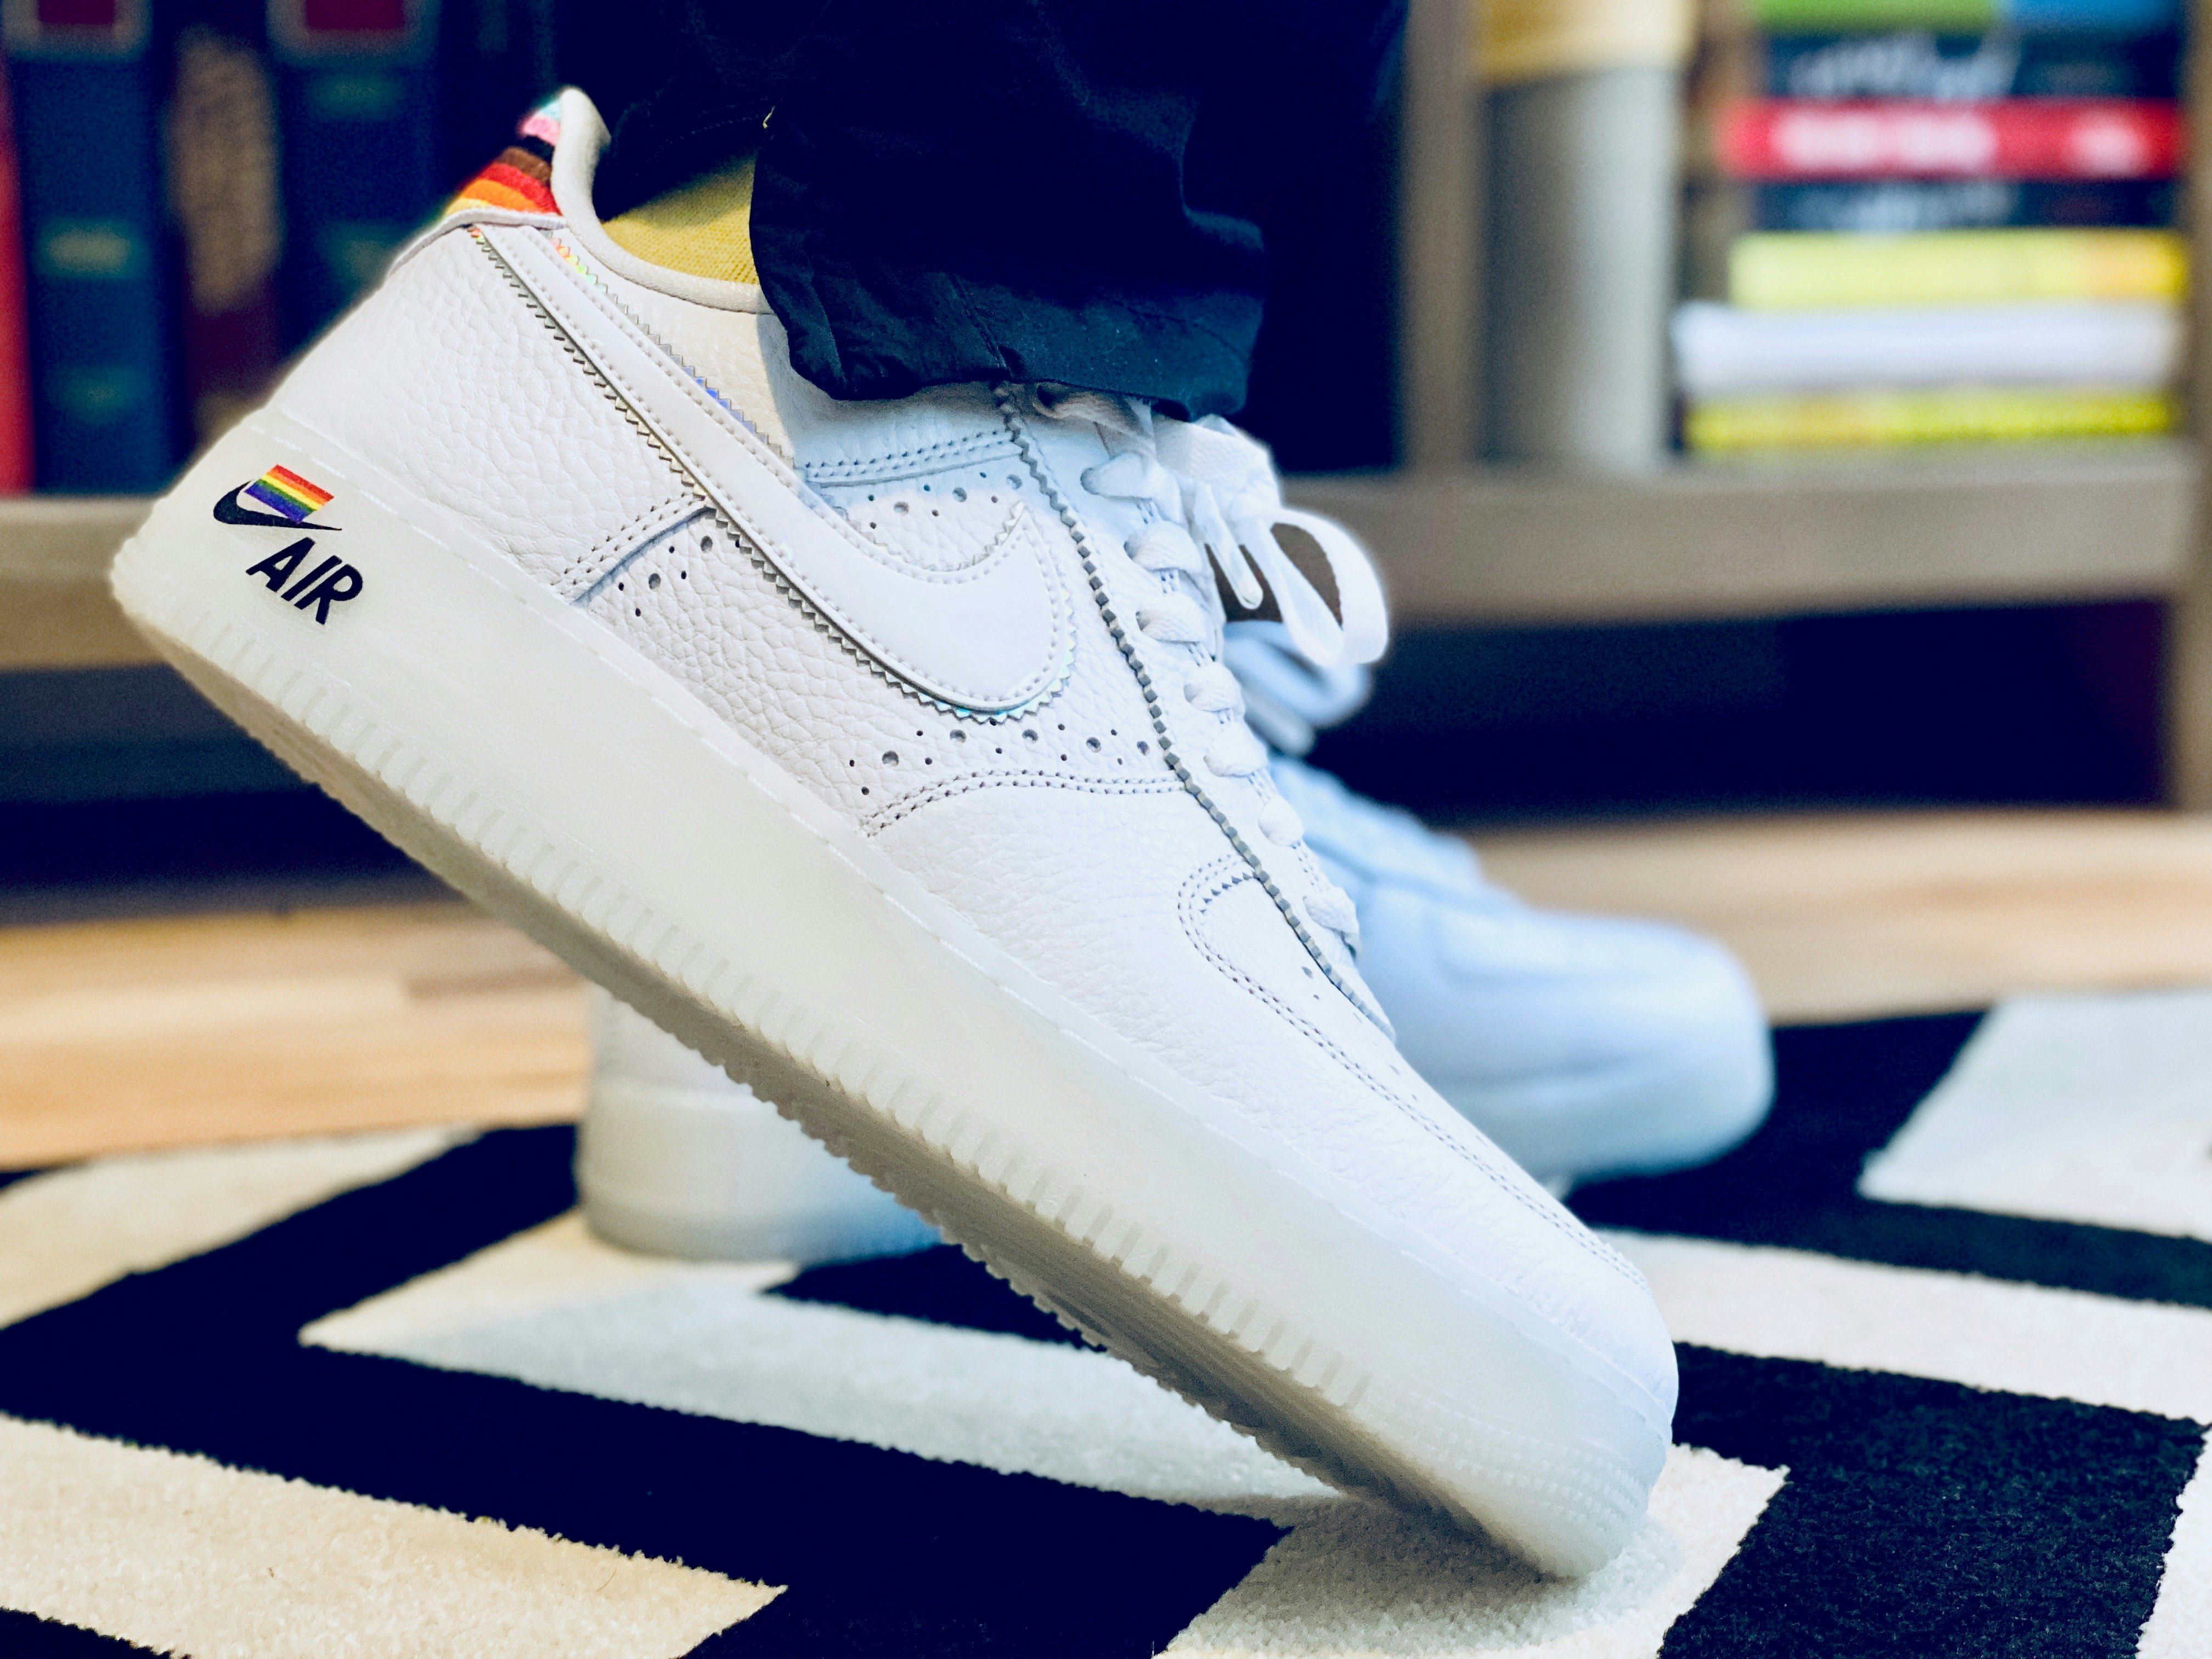 Wearing Nike's Pride-themed Air Force 1 